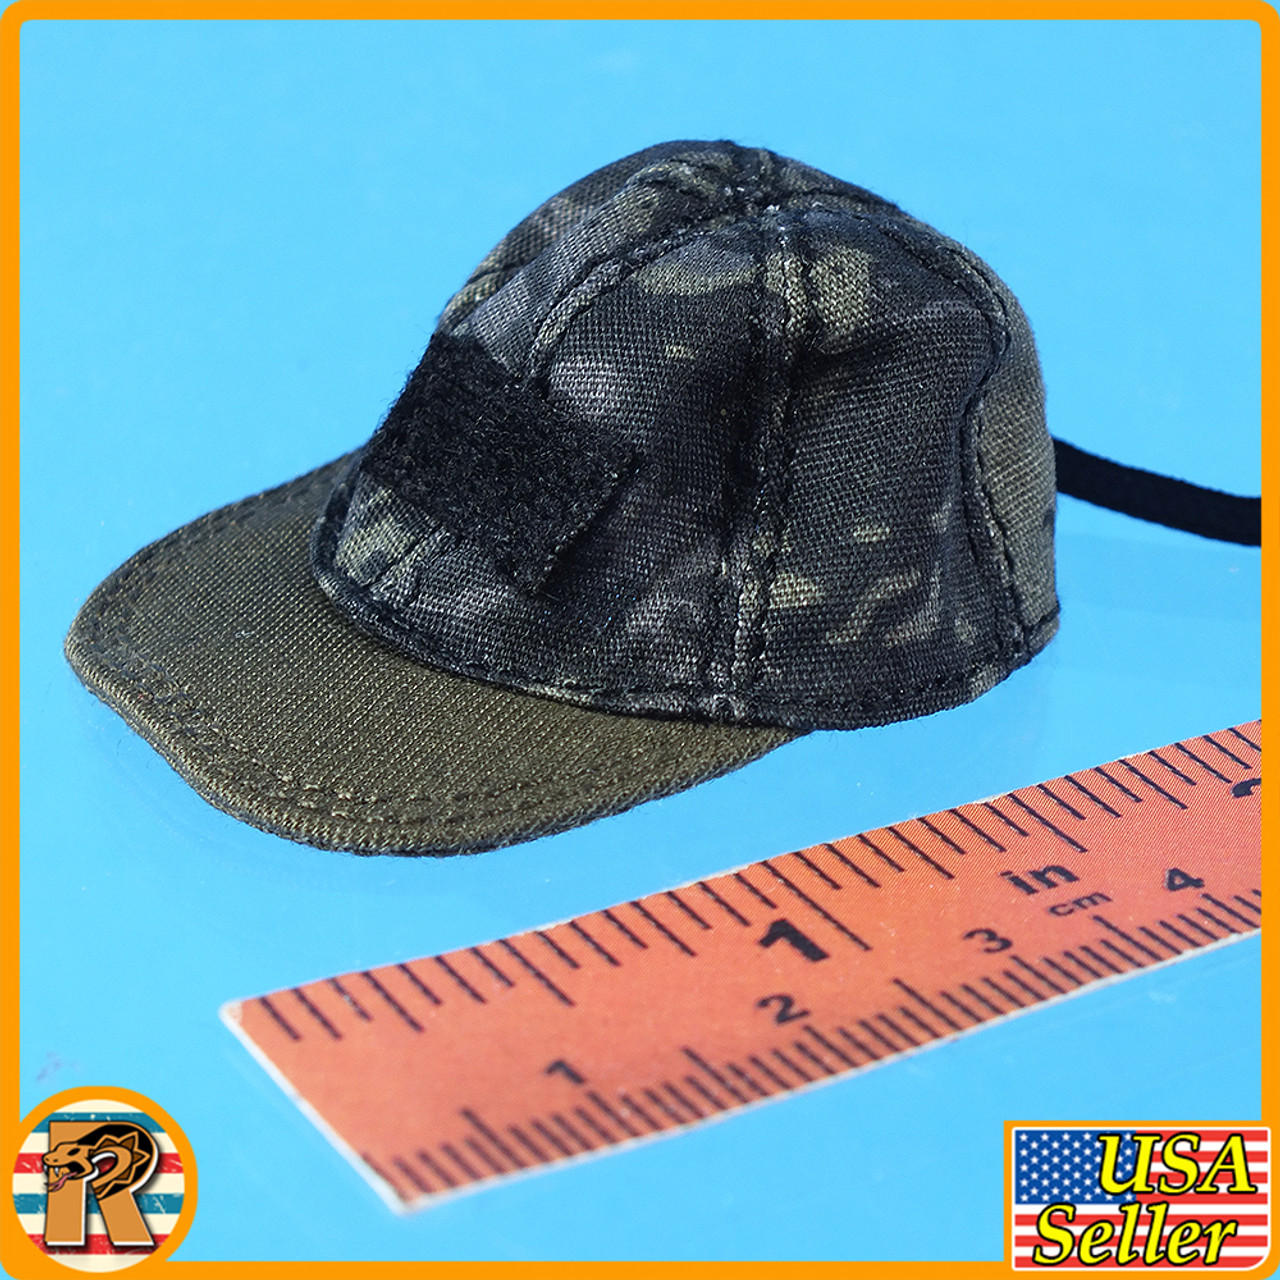 Tactical Instructor Chpt 2 - Ballcap Hat - 1/6 Scale -